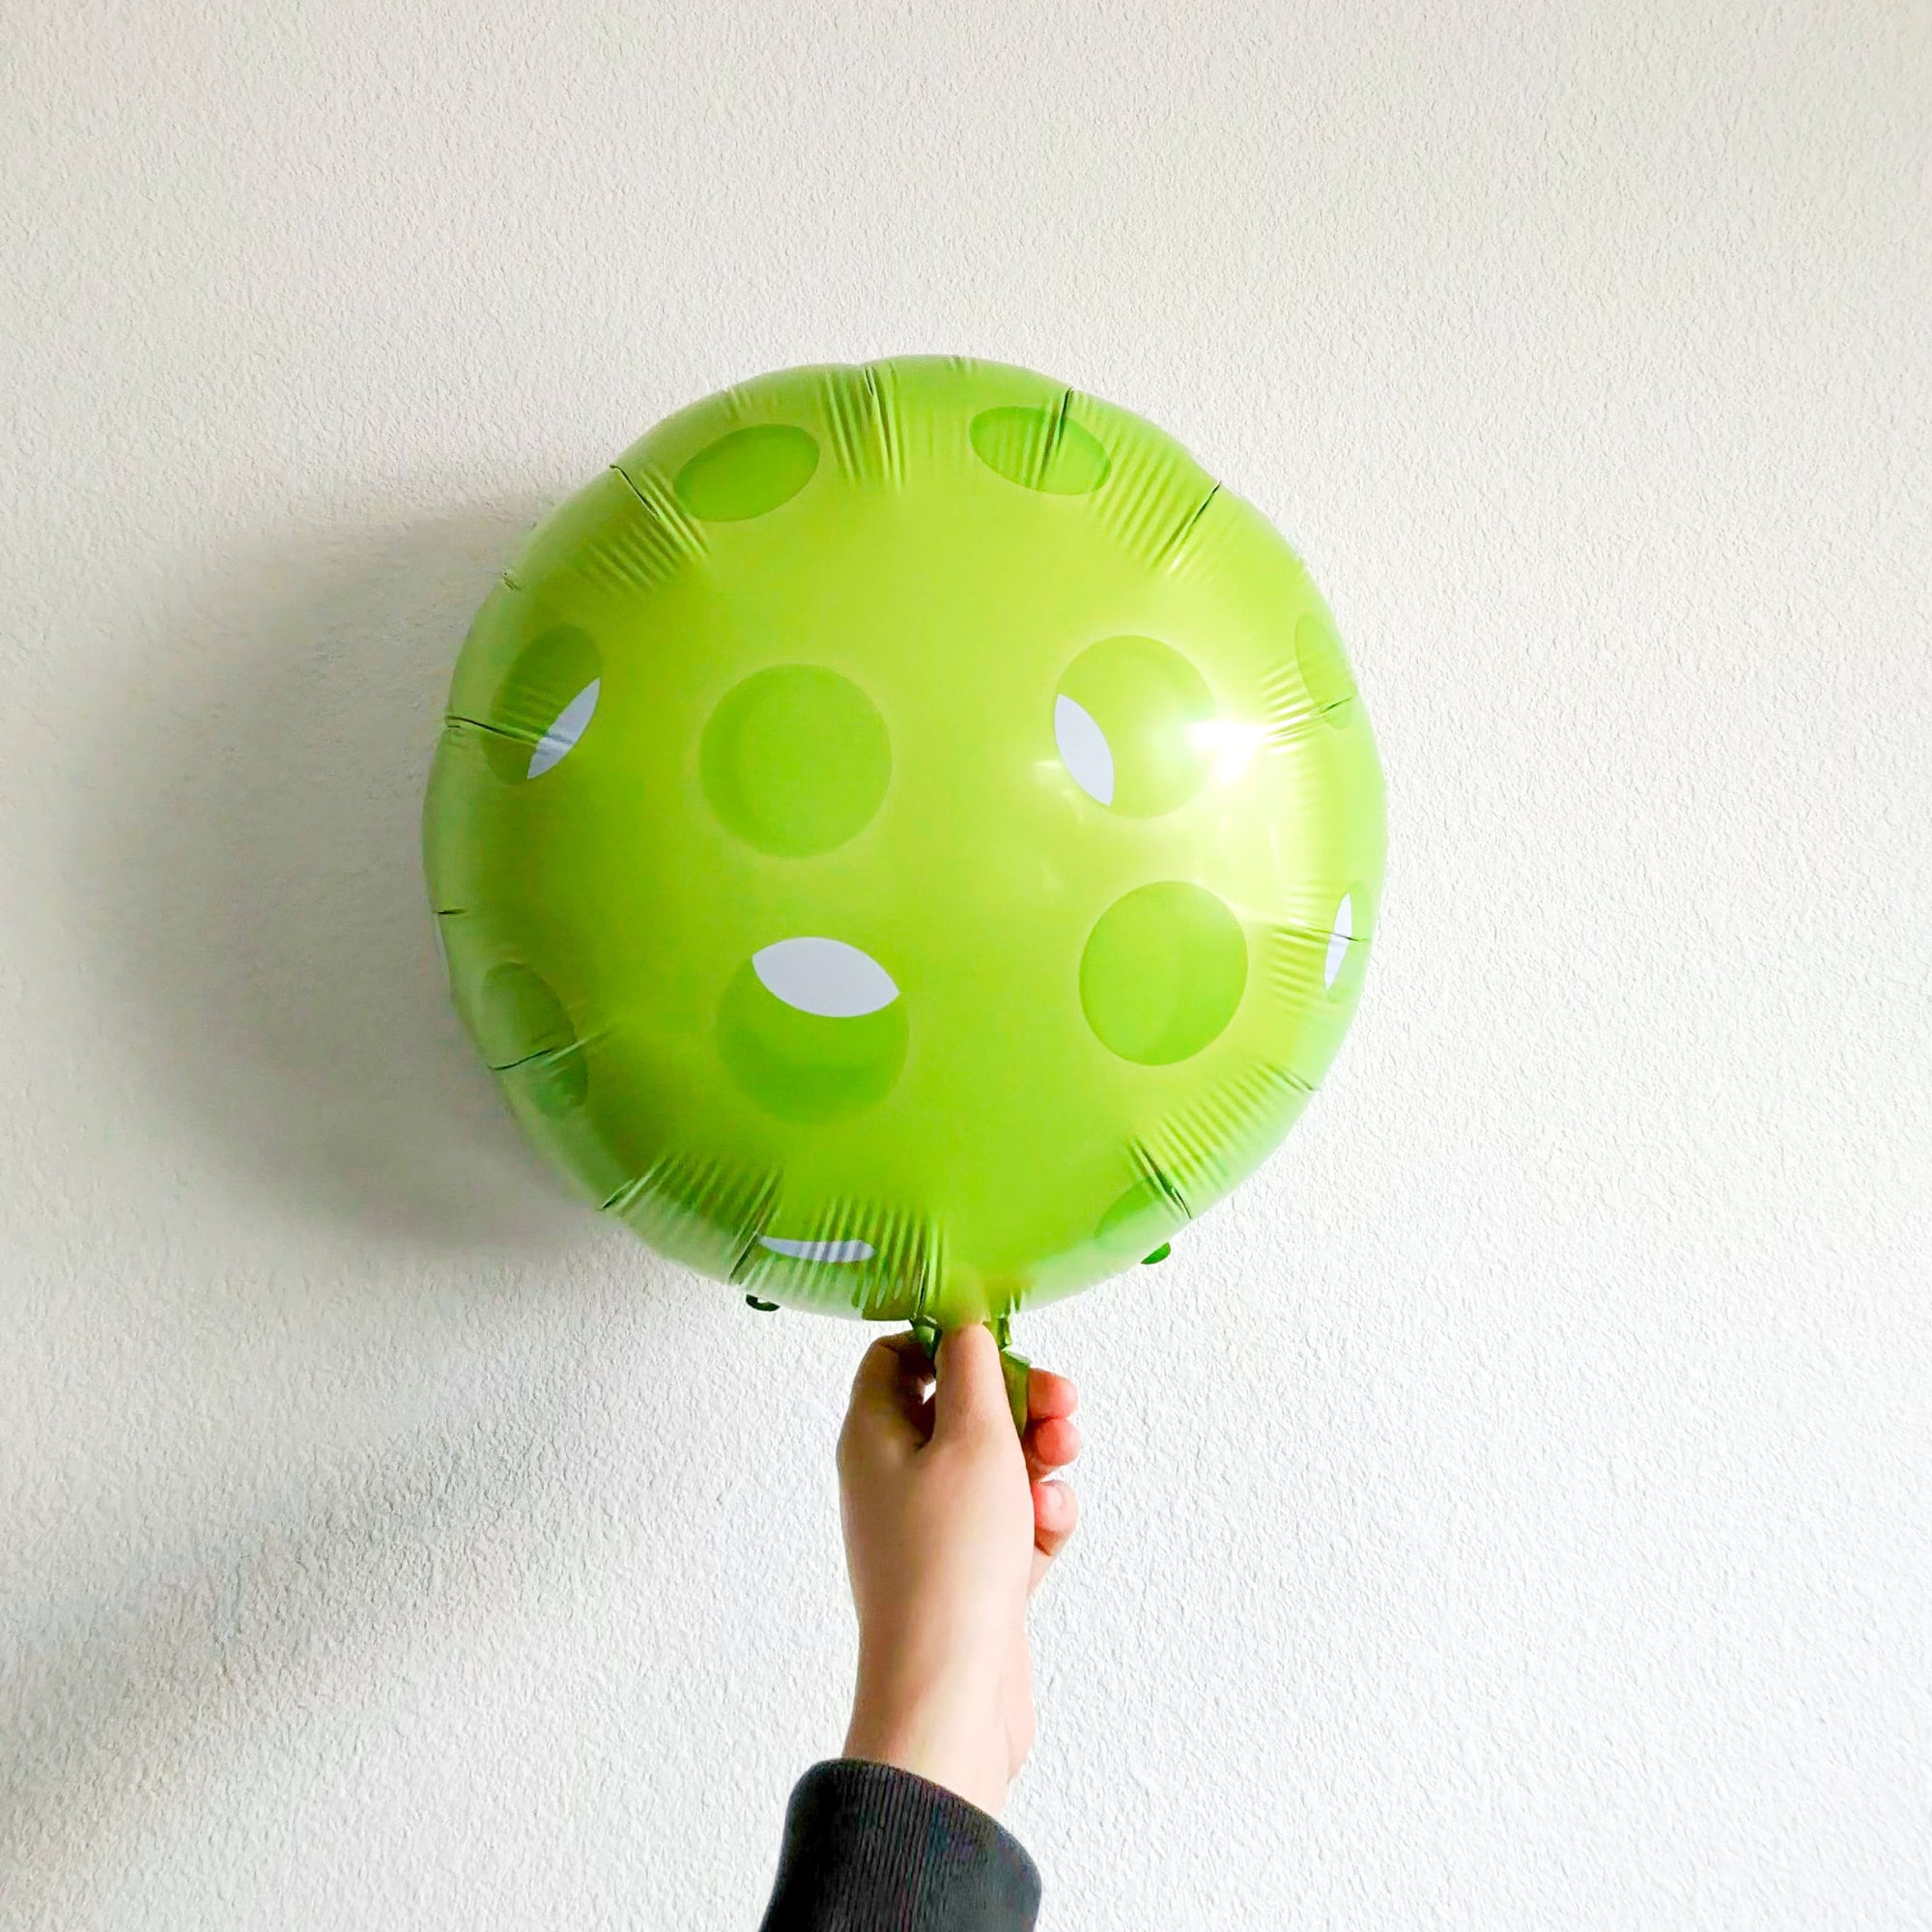 In my Pickleball Era Mylar Balloon 18 inch, pickleball theme birthday bach party, pickleball party decorations, gift for pickleball friend